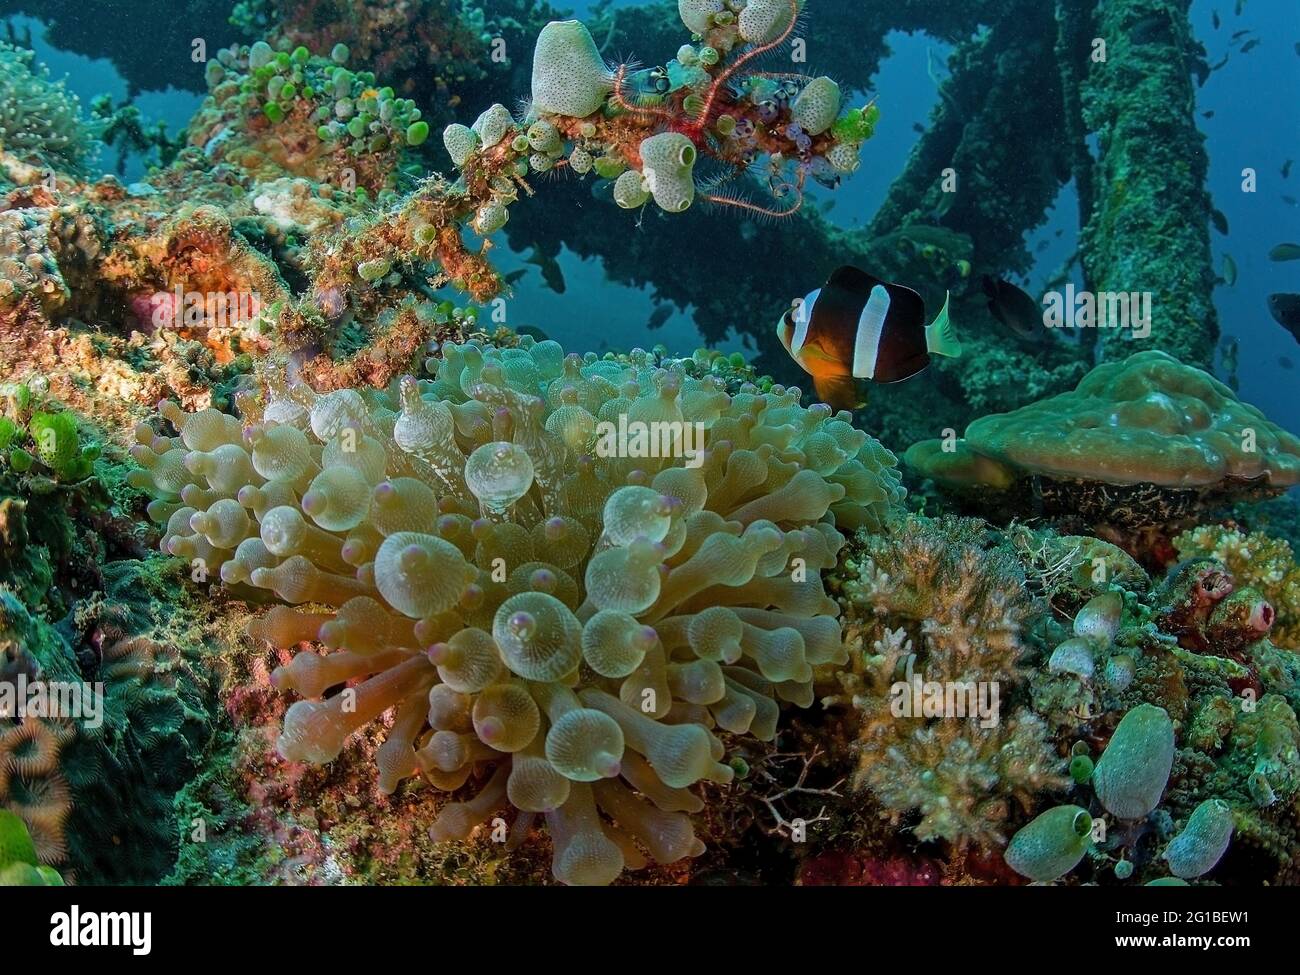 Amphiprion with striped body swimming among coral reefs with polyps under pure ocean aqua Stock Photo